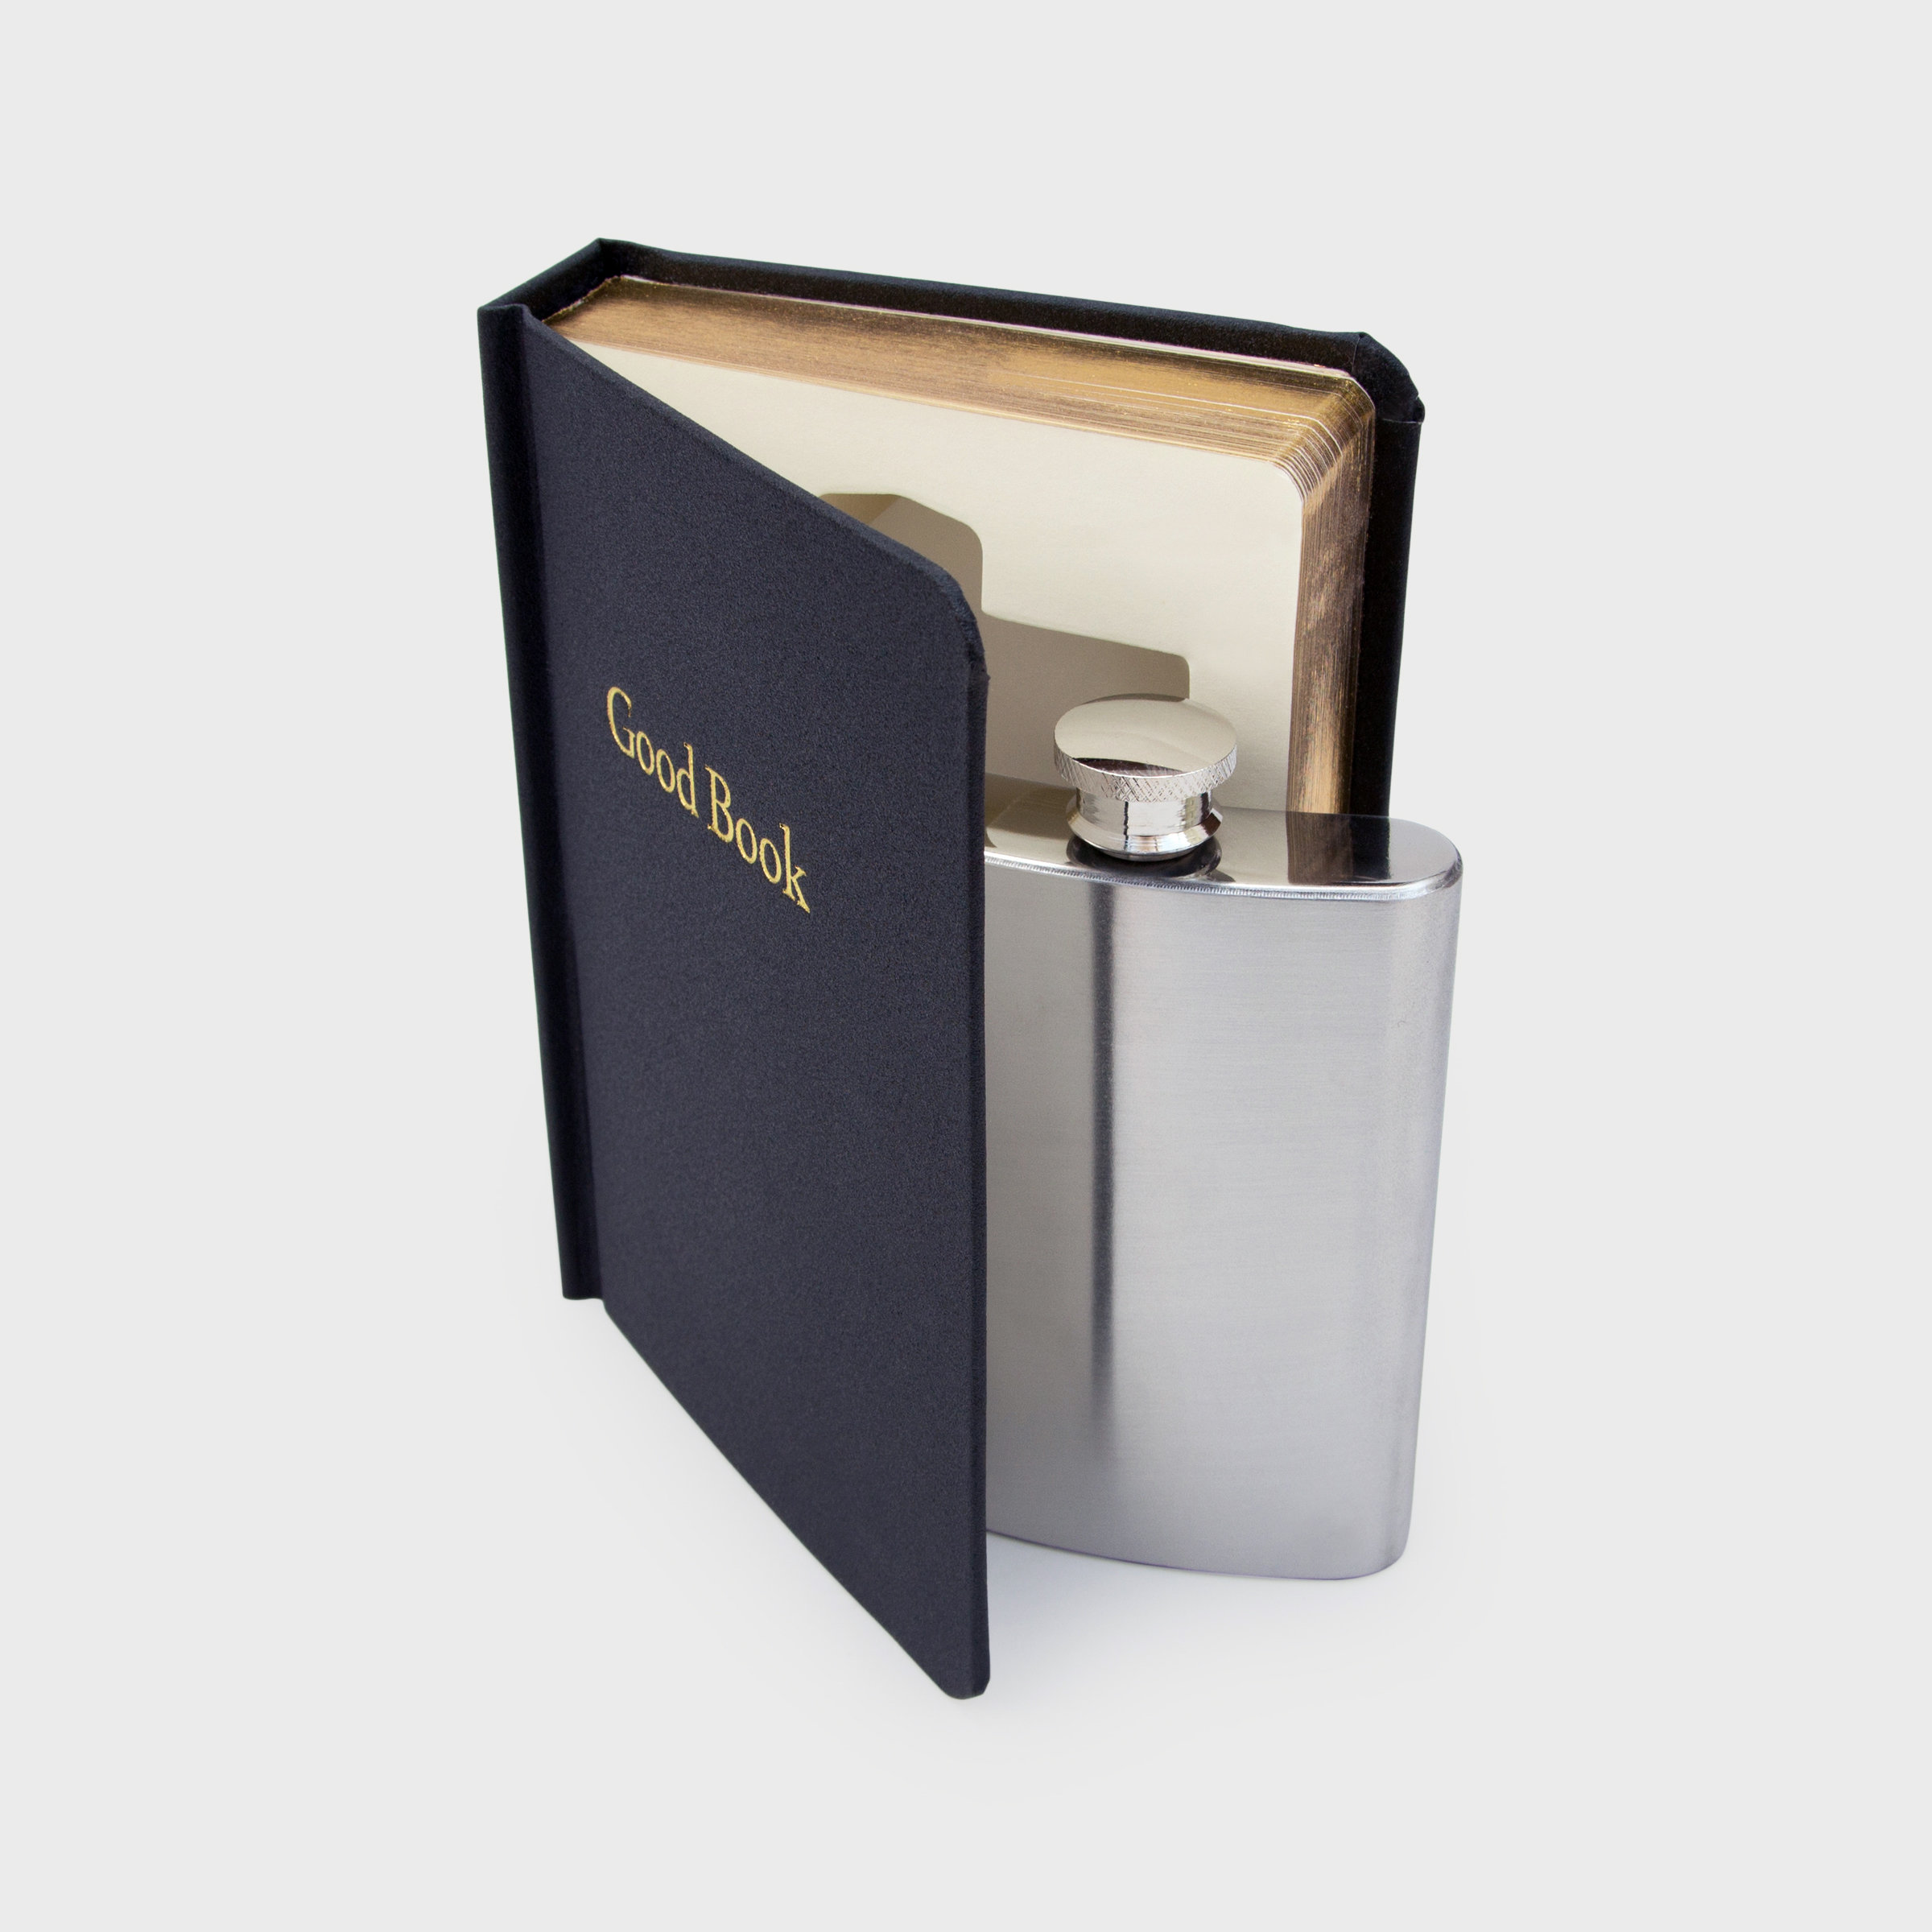 Flask in a the 